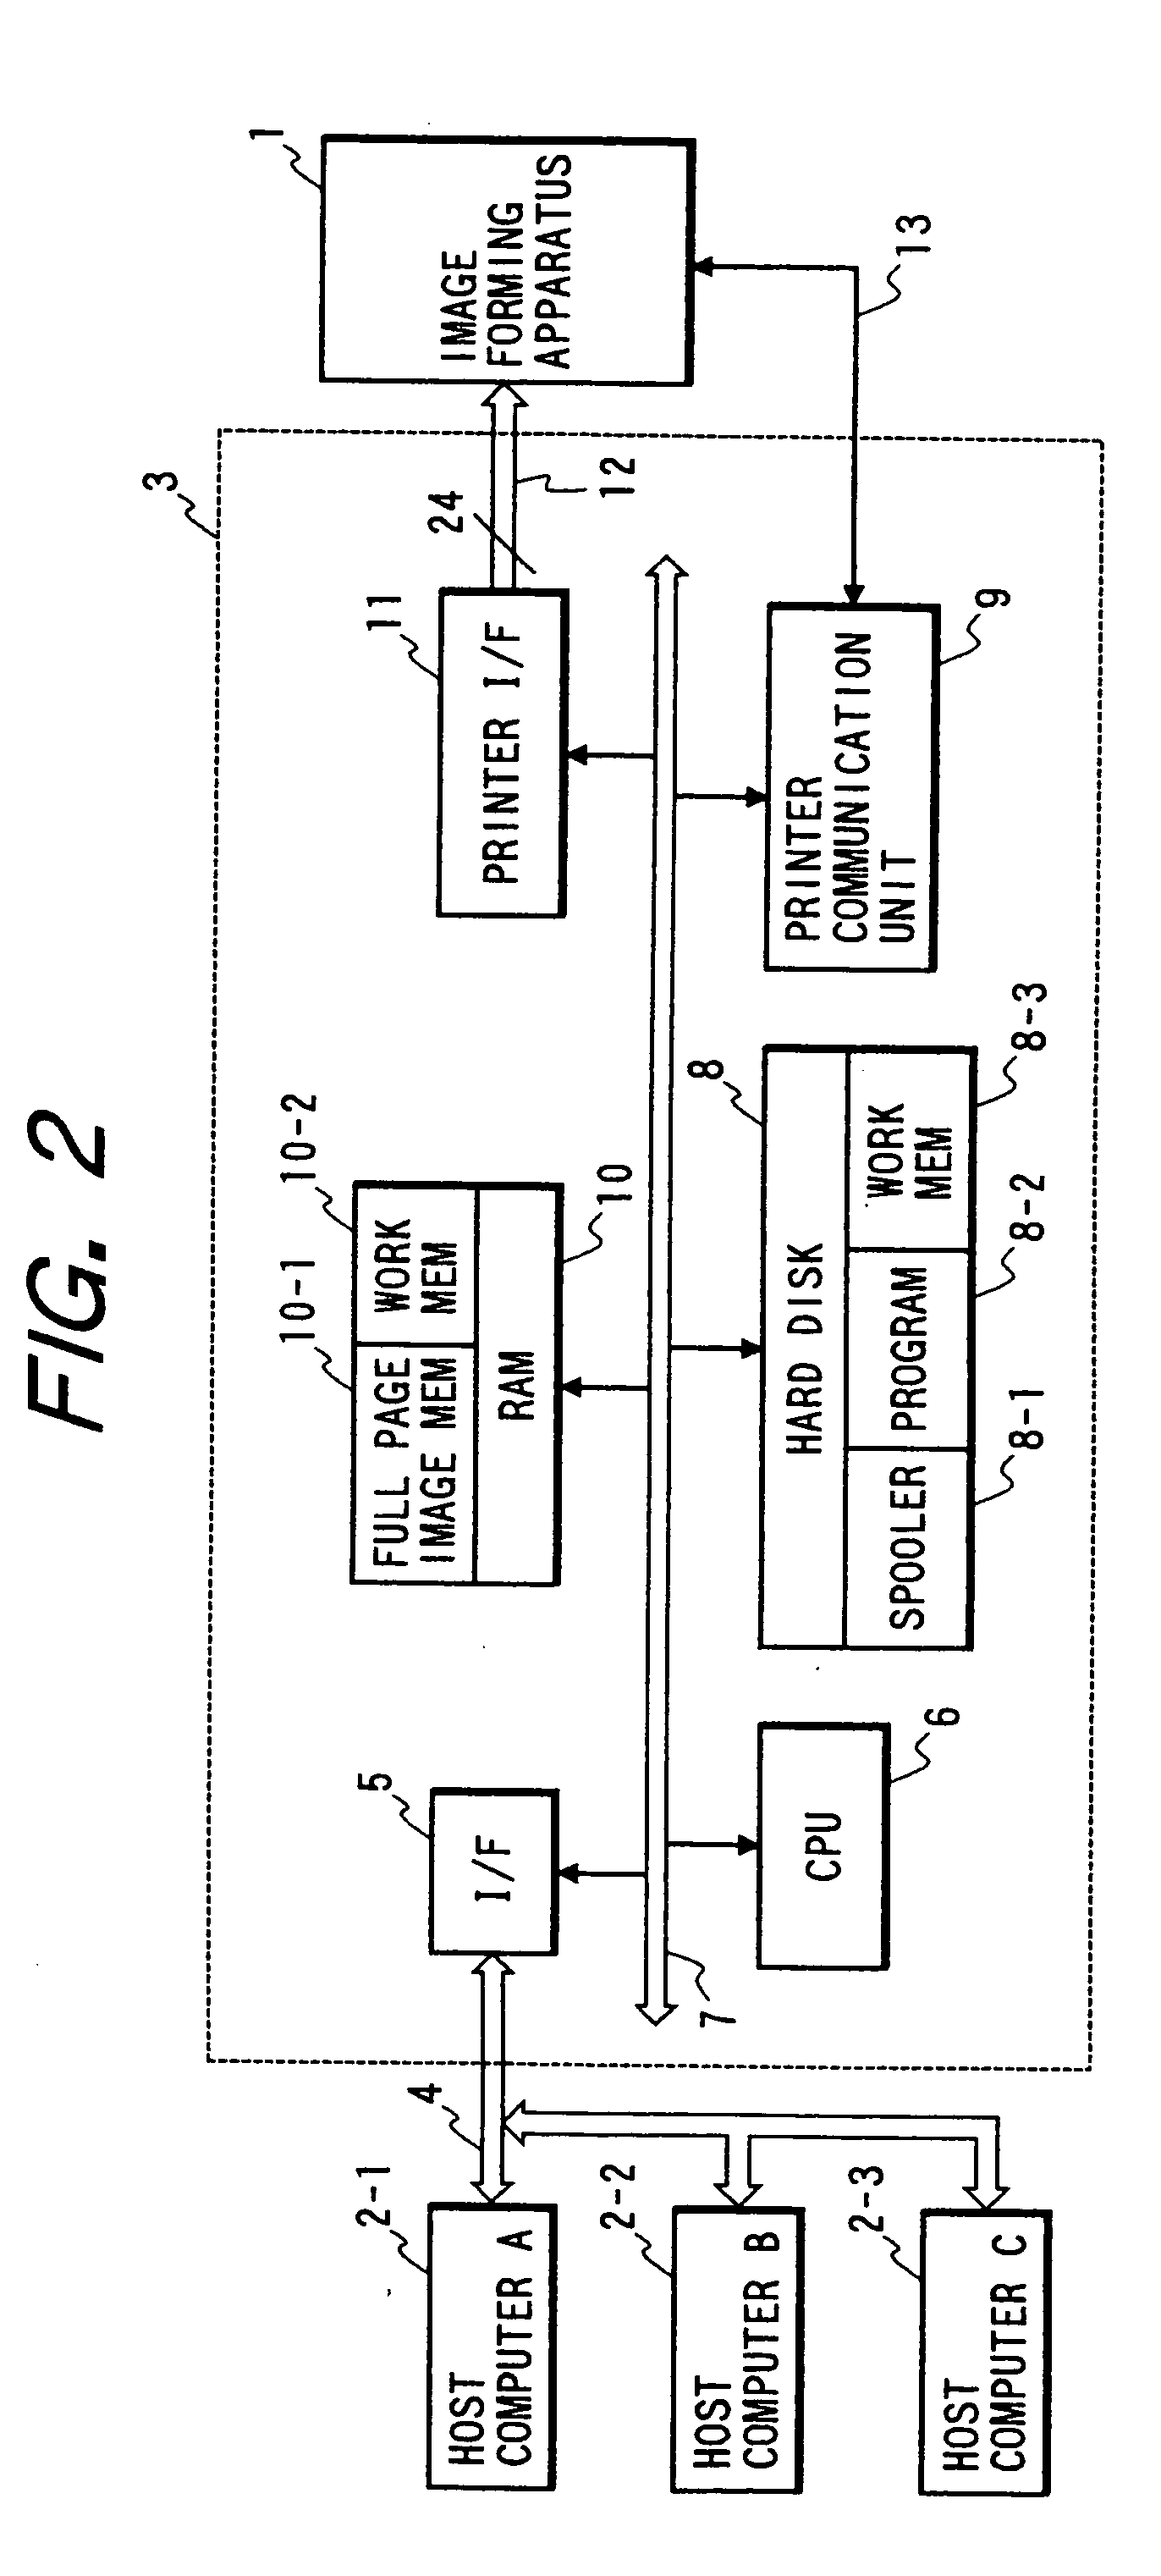 Apparatus for controlling image processing and a method for controlling image processing